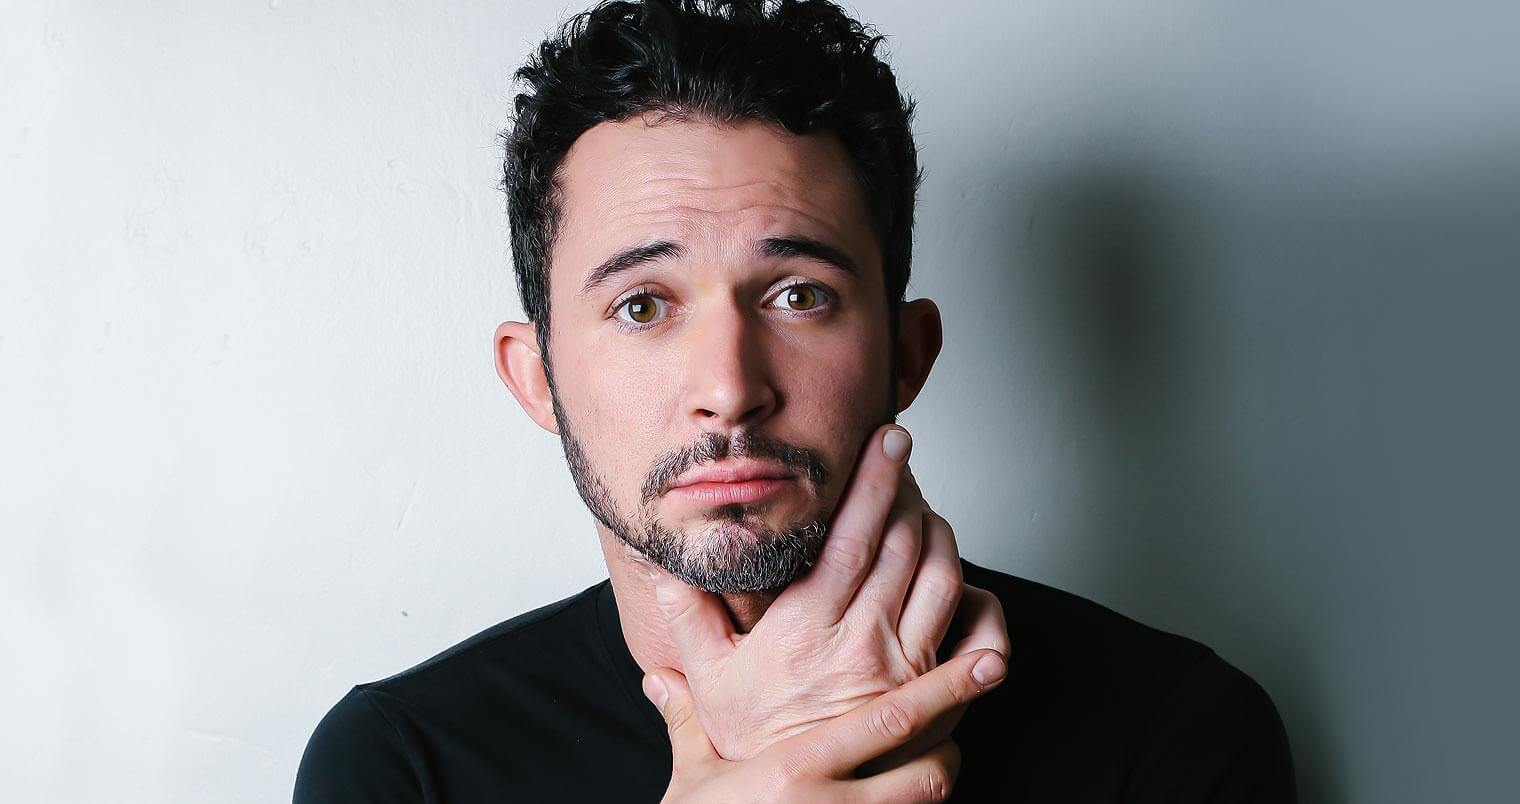 Chillin' with: Justin Willman, featured image